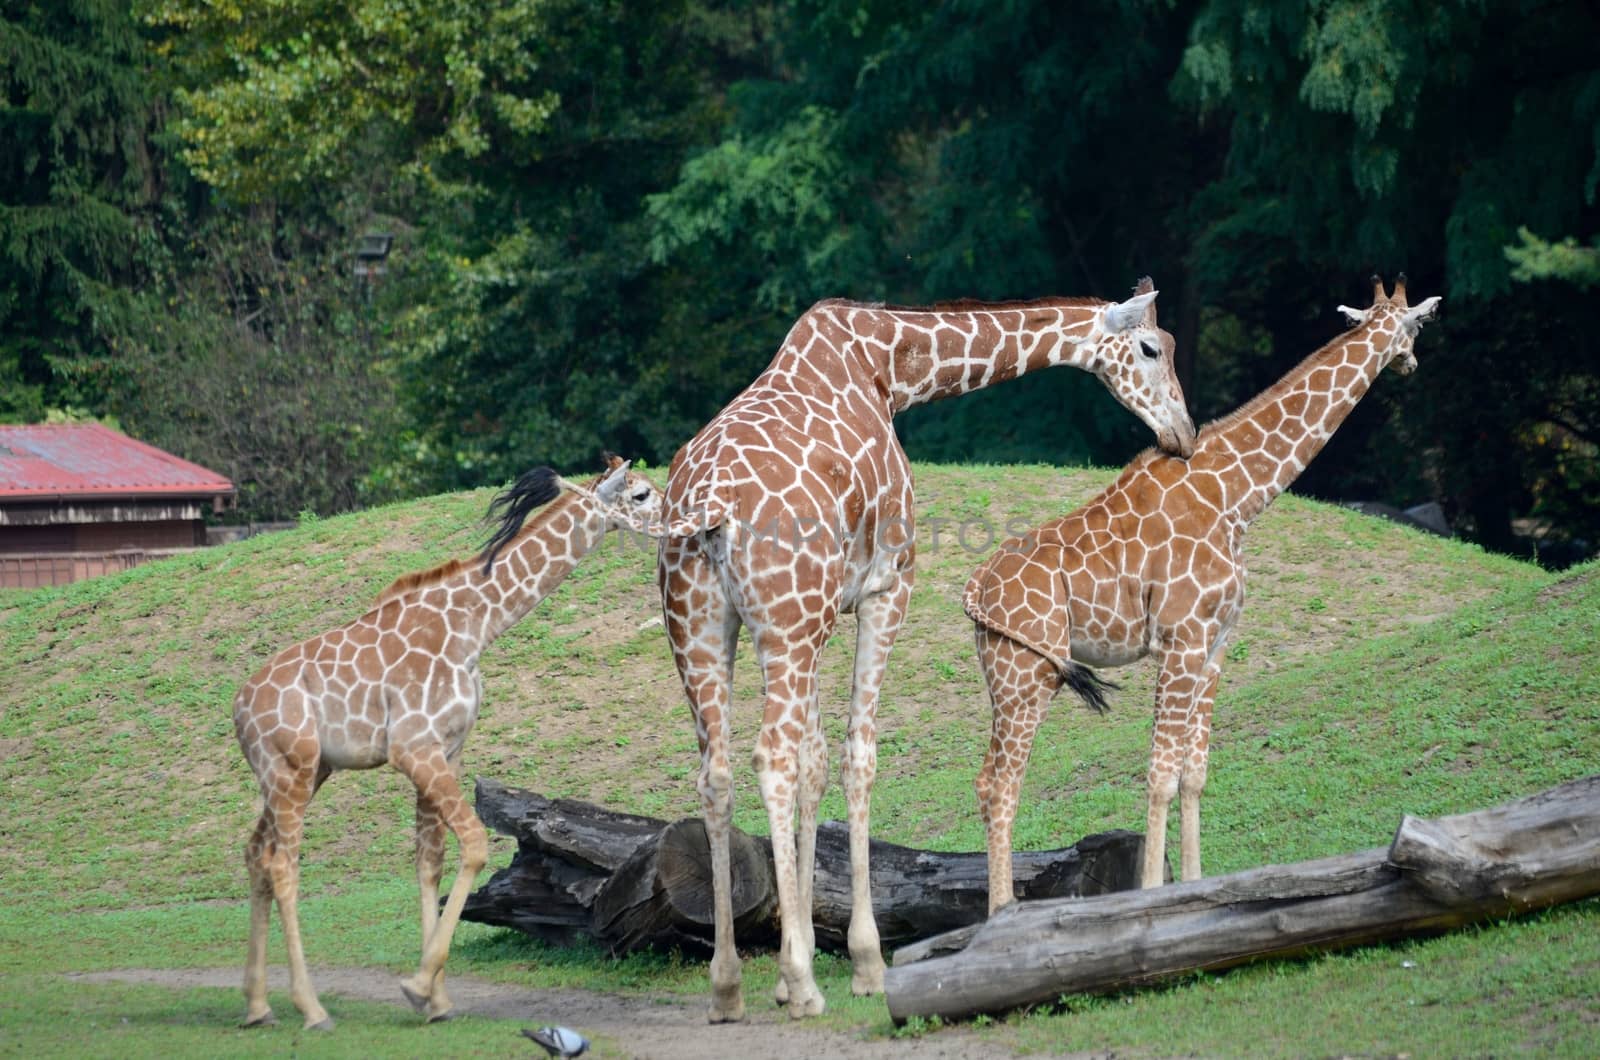 Group of three giraffes in Wroclaw's ZOO, Poland. All animals turning necks in same direction.